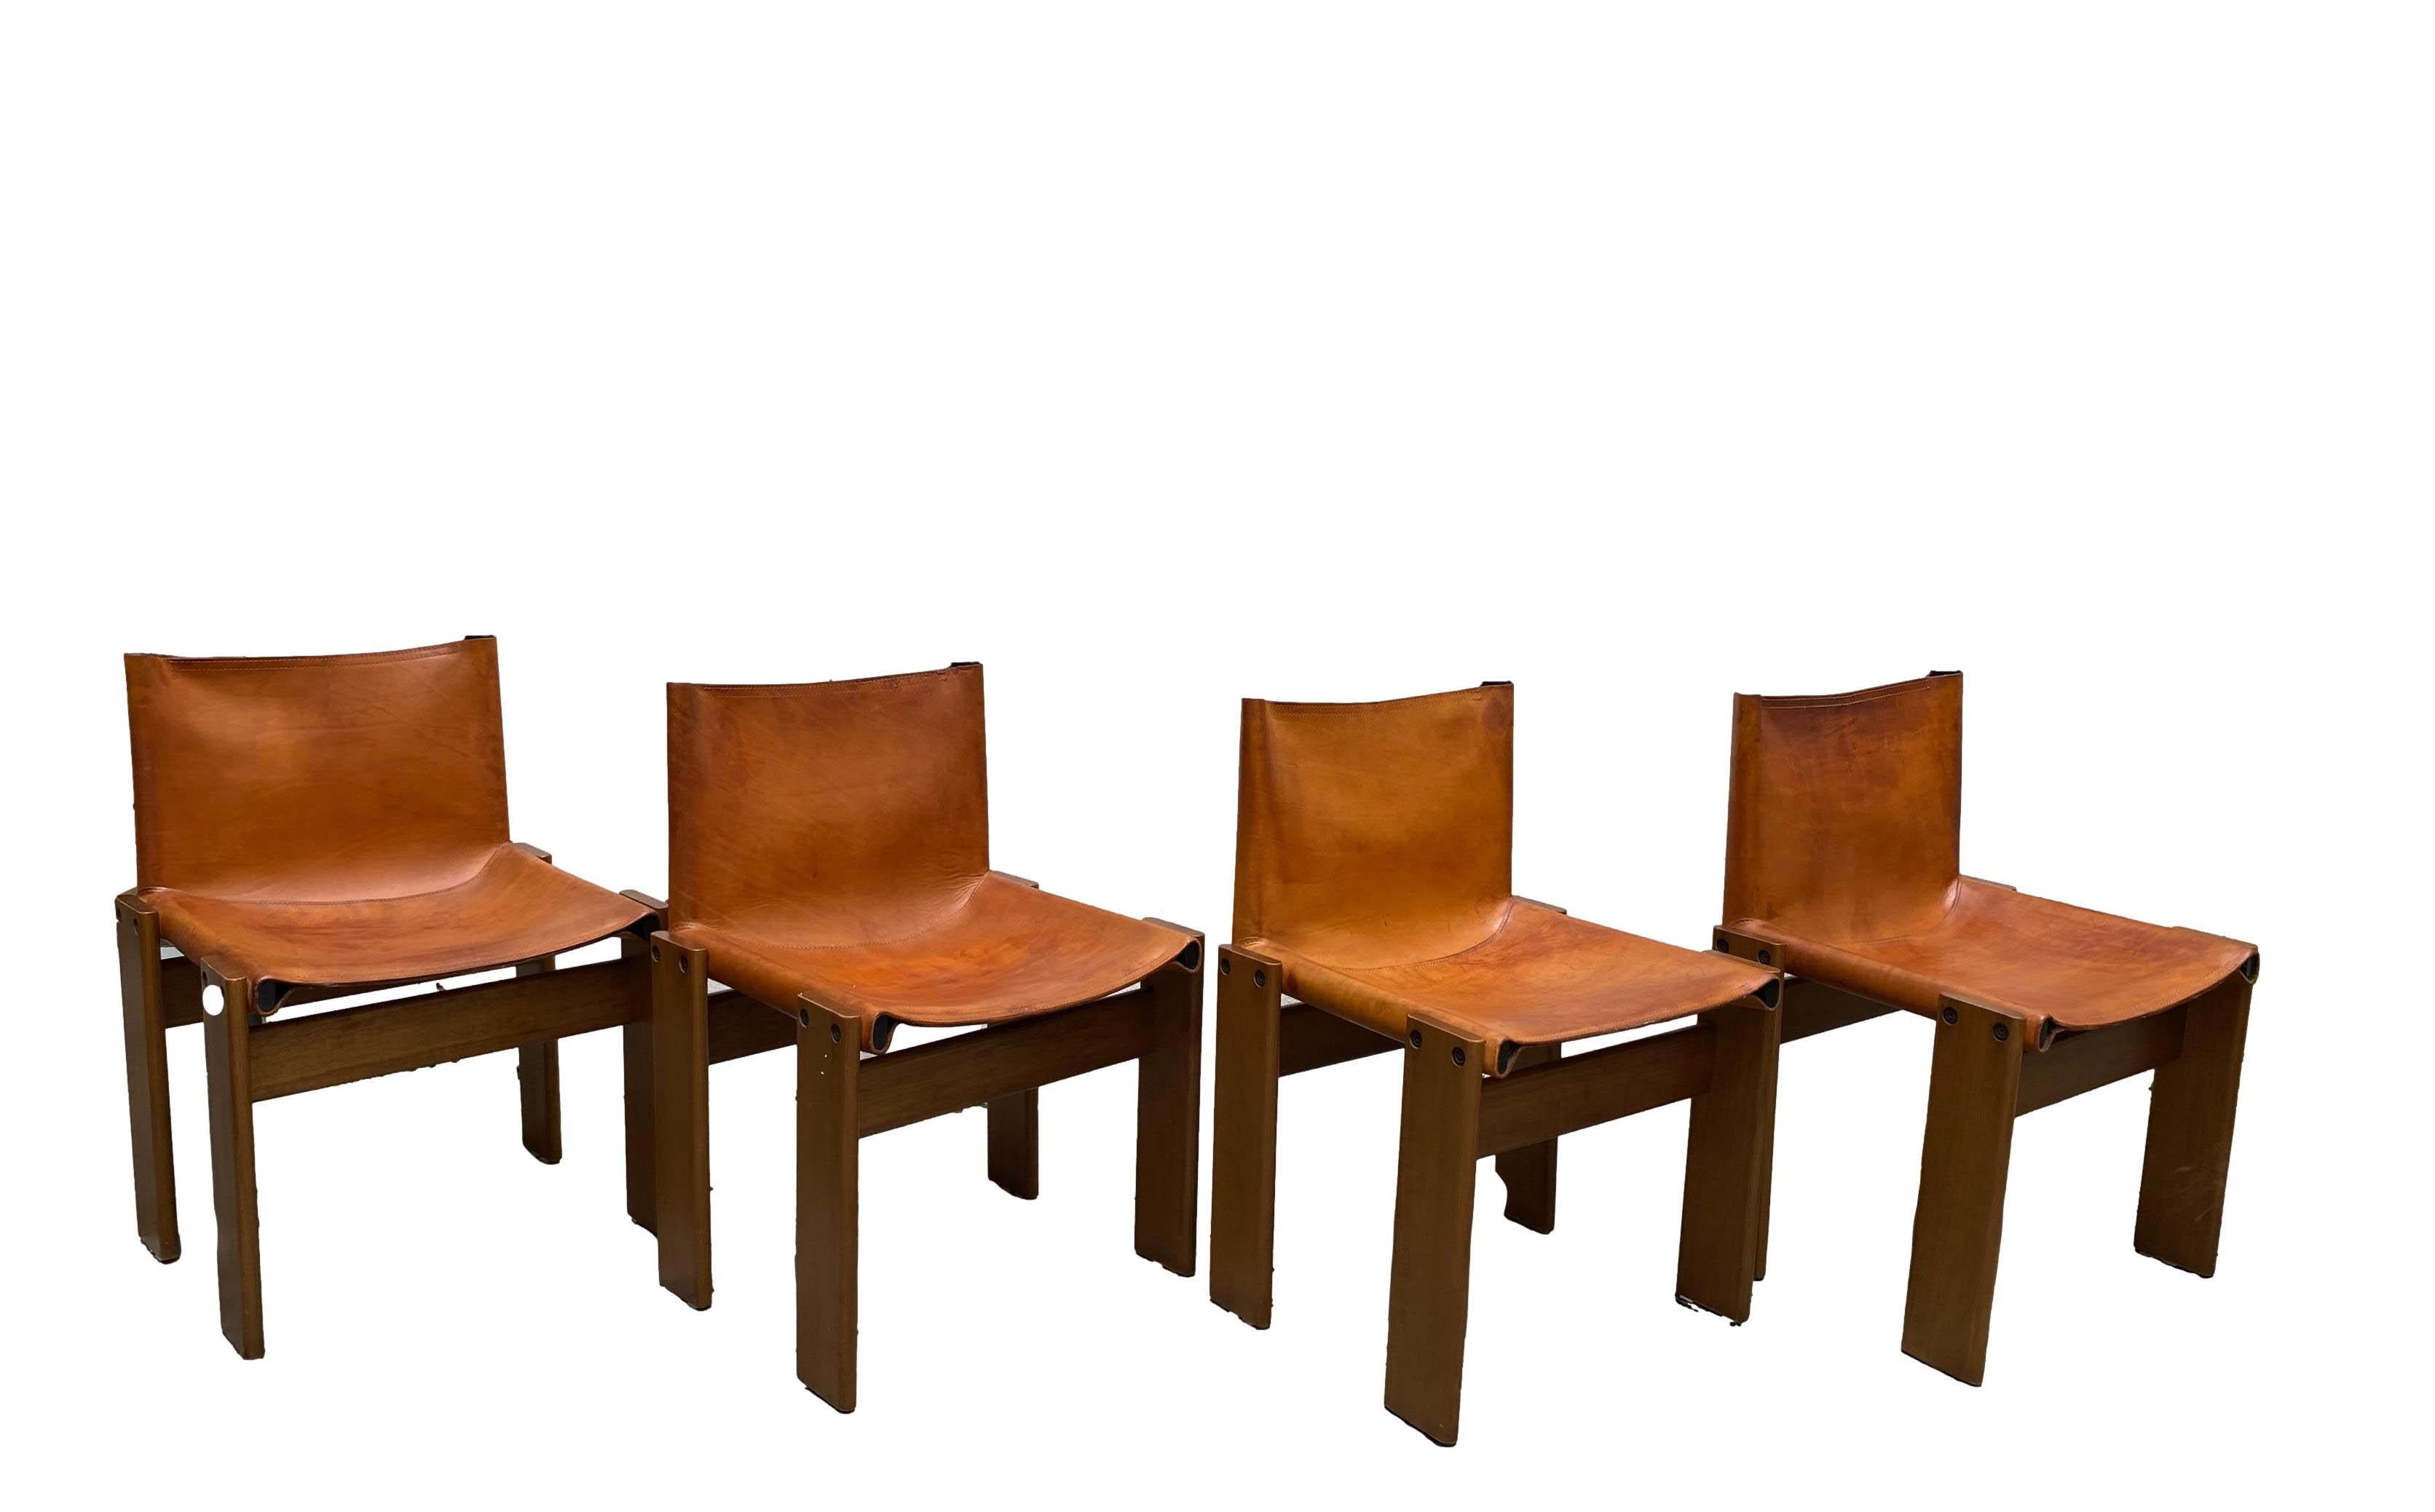 4 Chairs Mod. Monk in wood and cognac-coloured leather. Chair with seat and back in leather fitted on two steel tubes screwed to two solid wood bridges that form the ground support.